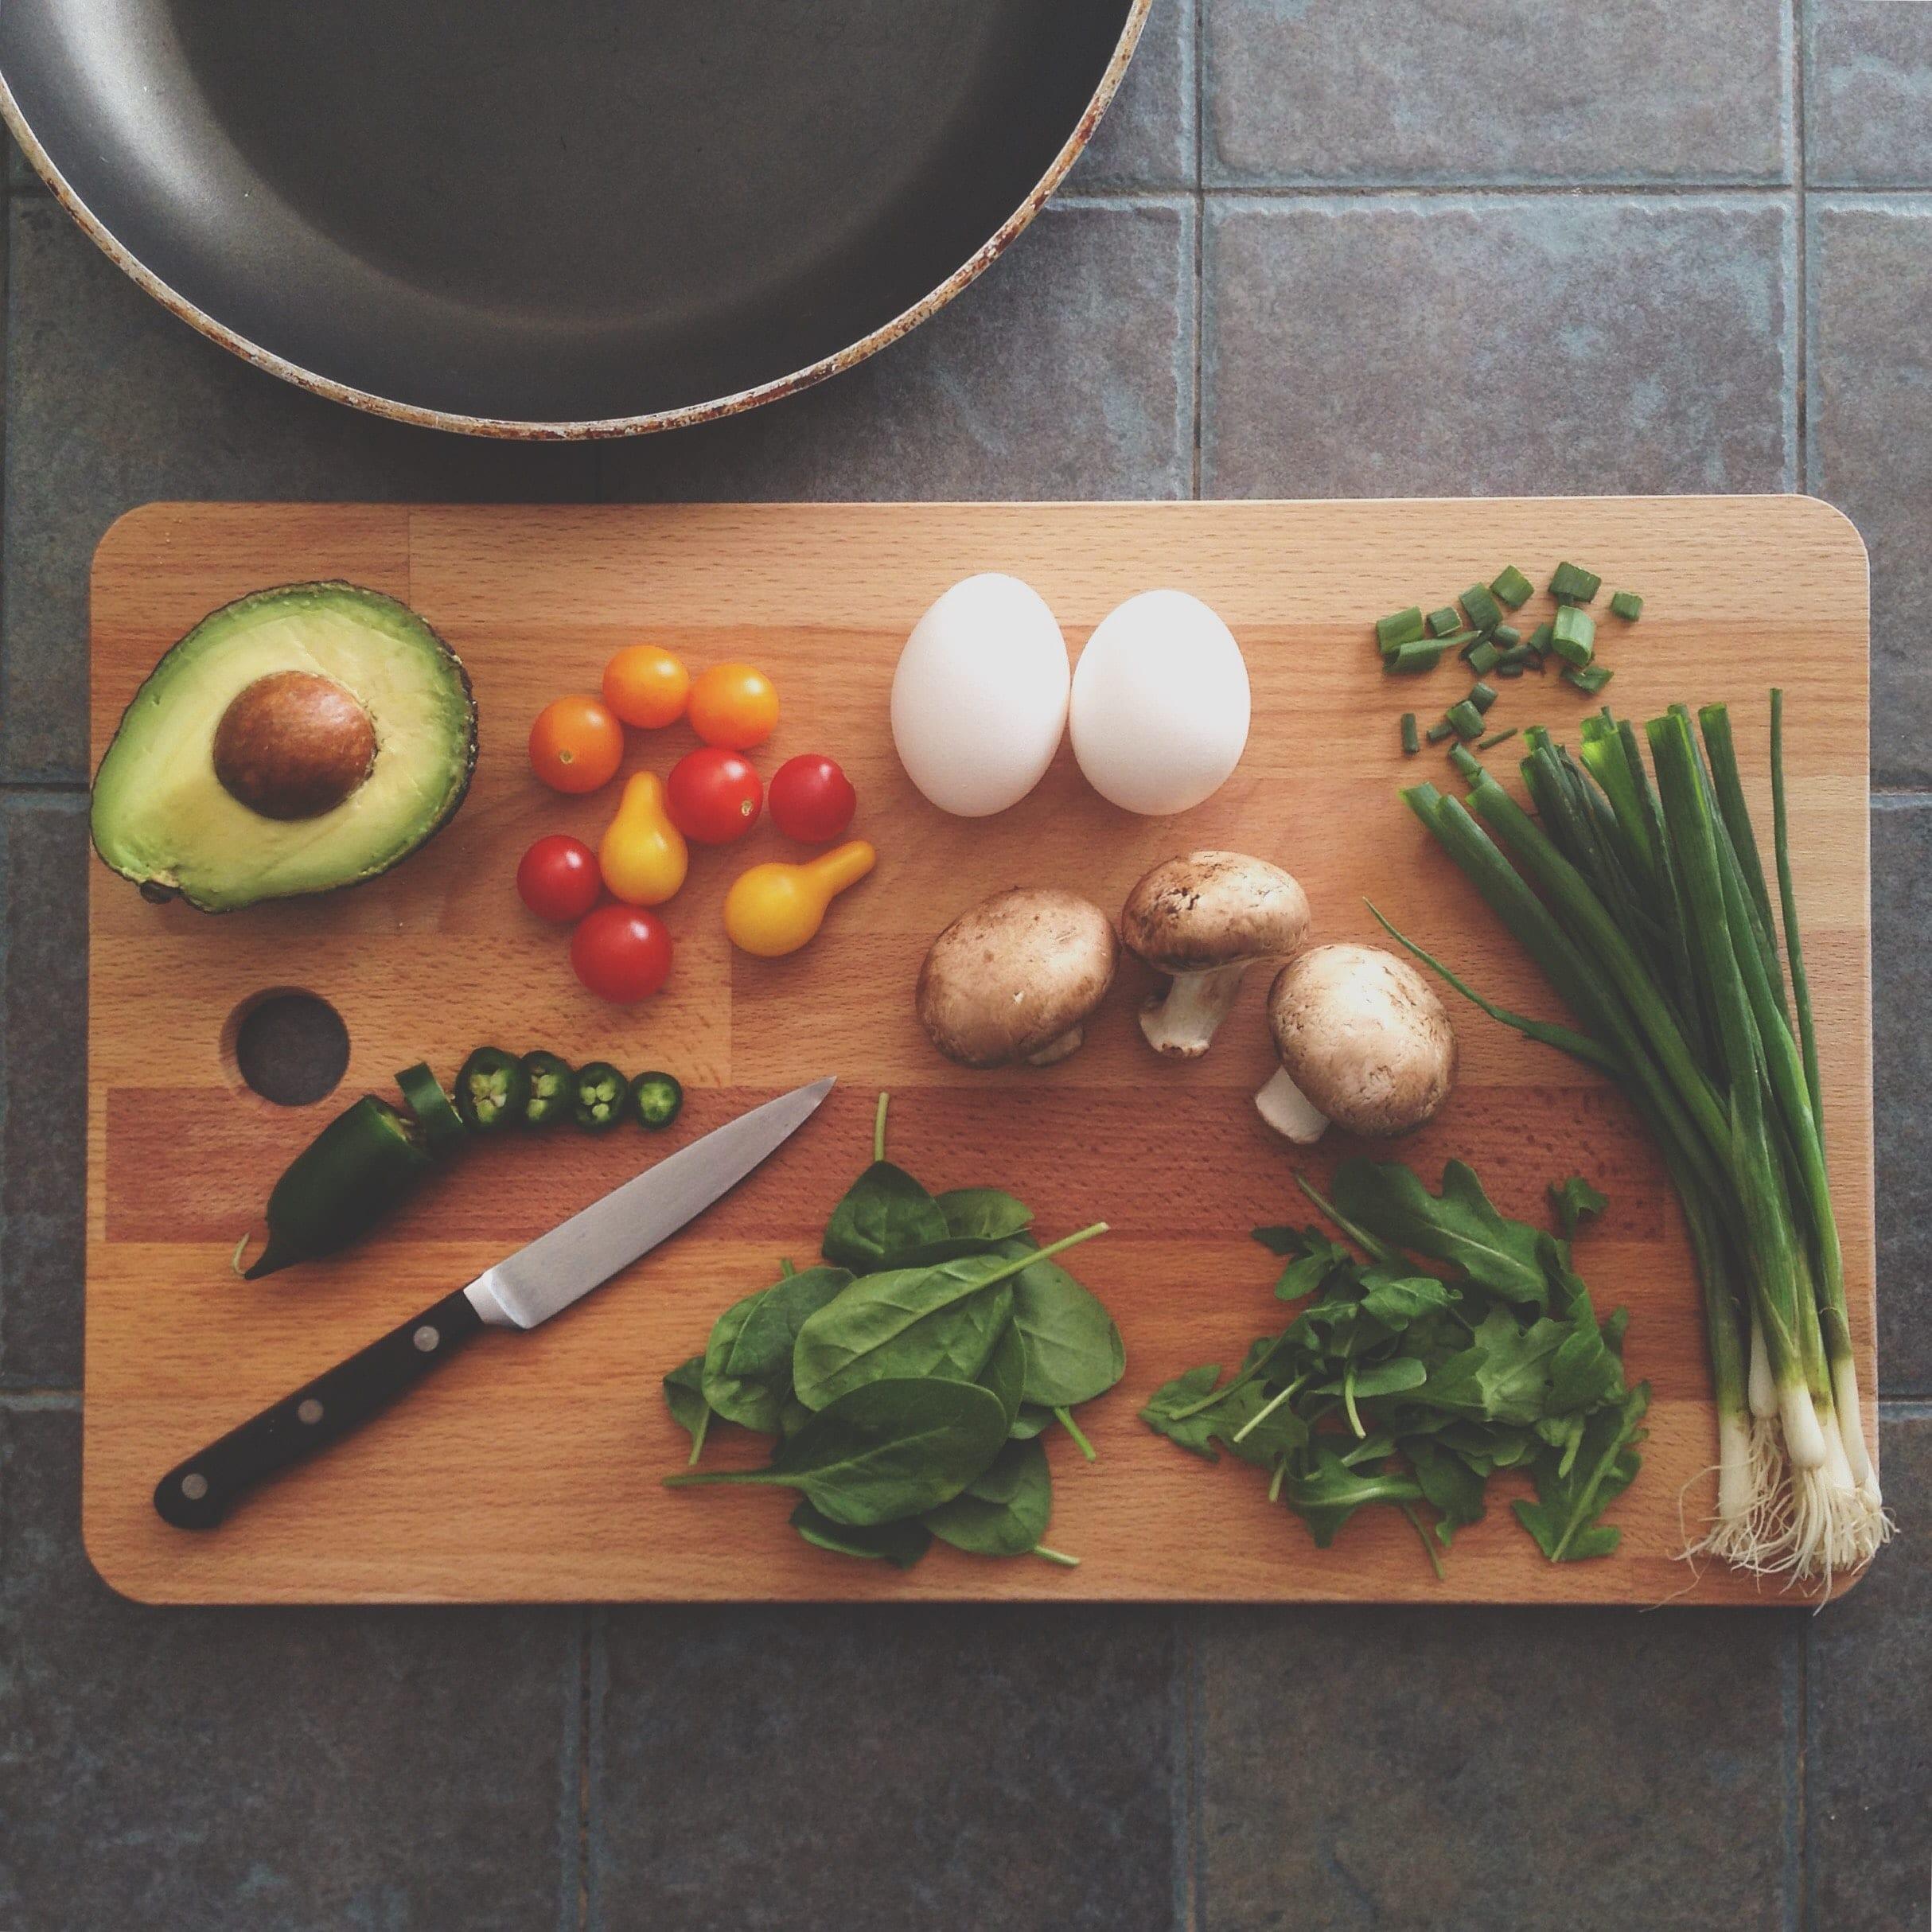 A cutting board witha knife, jalapeno pepper, avocado, cherry tomatoes, eggs, mushroom, chives and spinach.